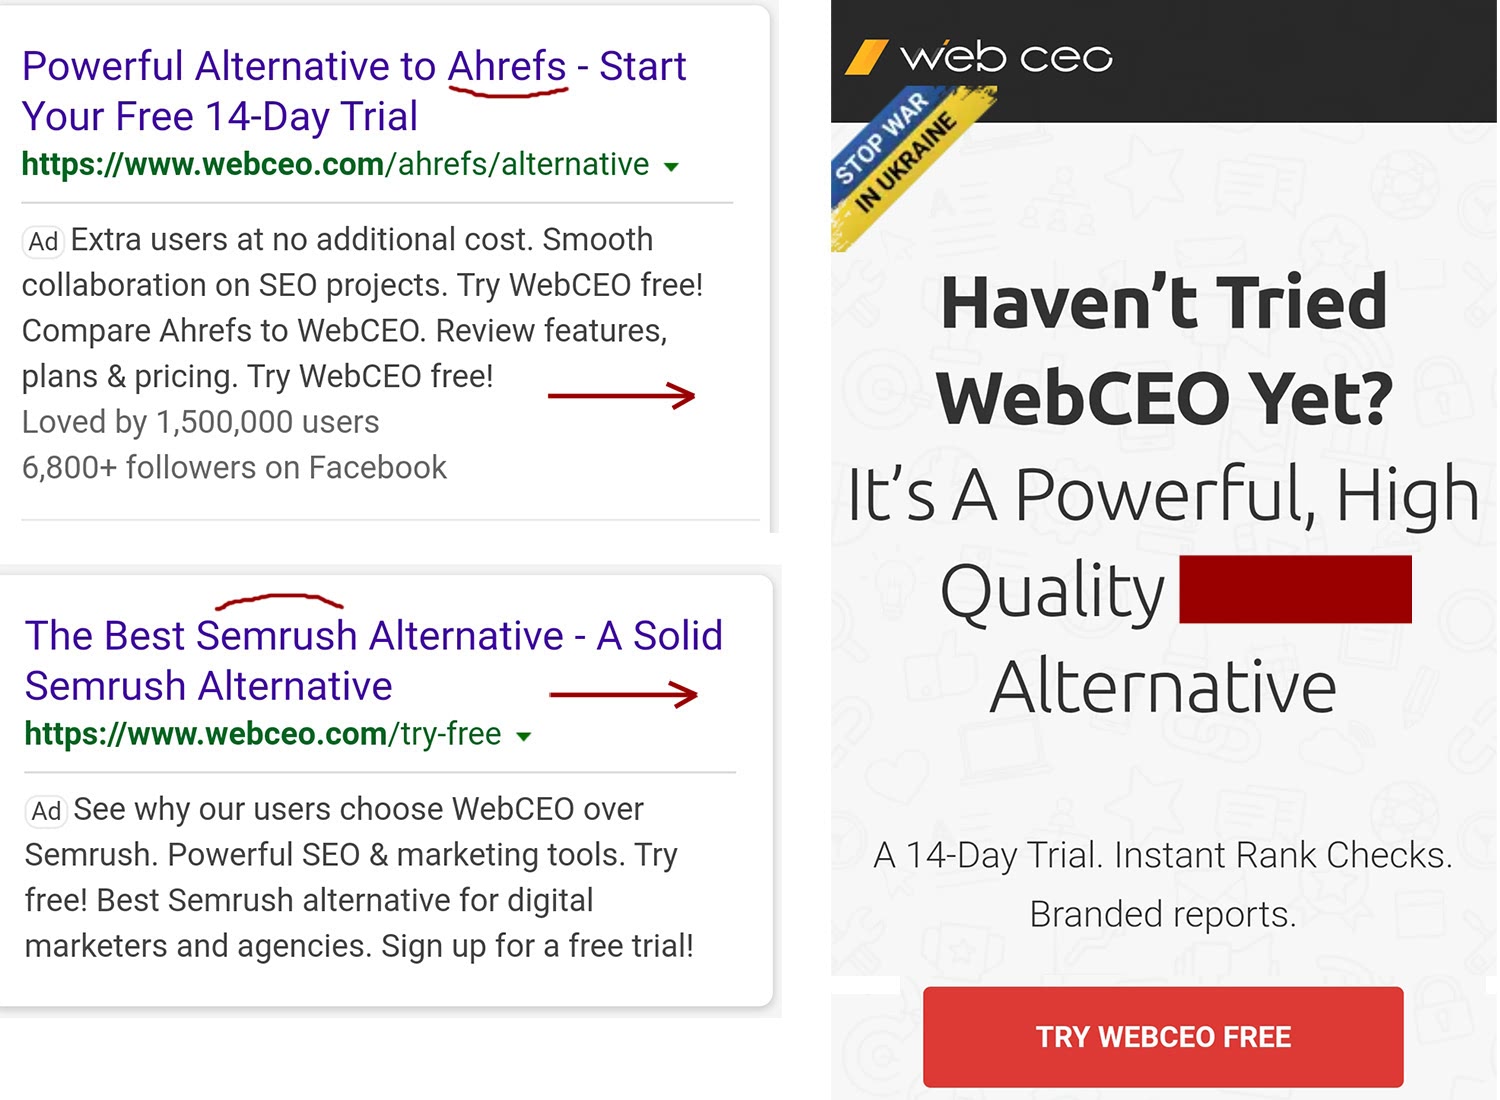 WebCEO wants to be an alternative to other big SEO brands